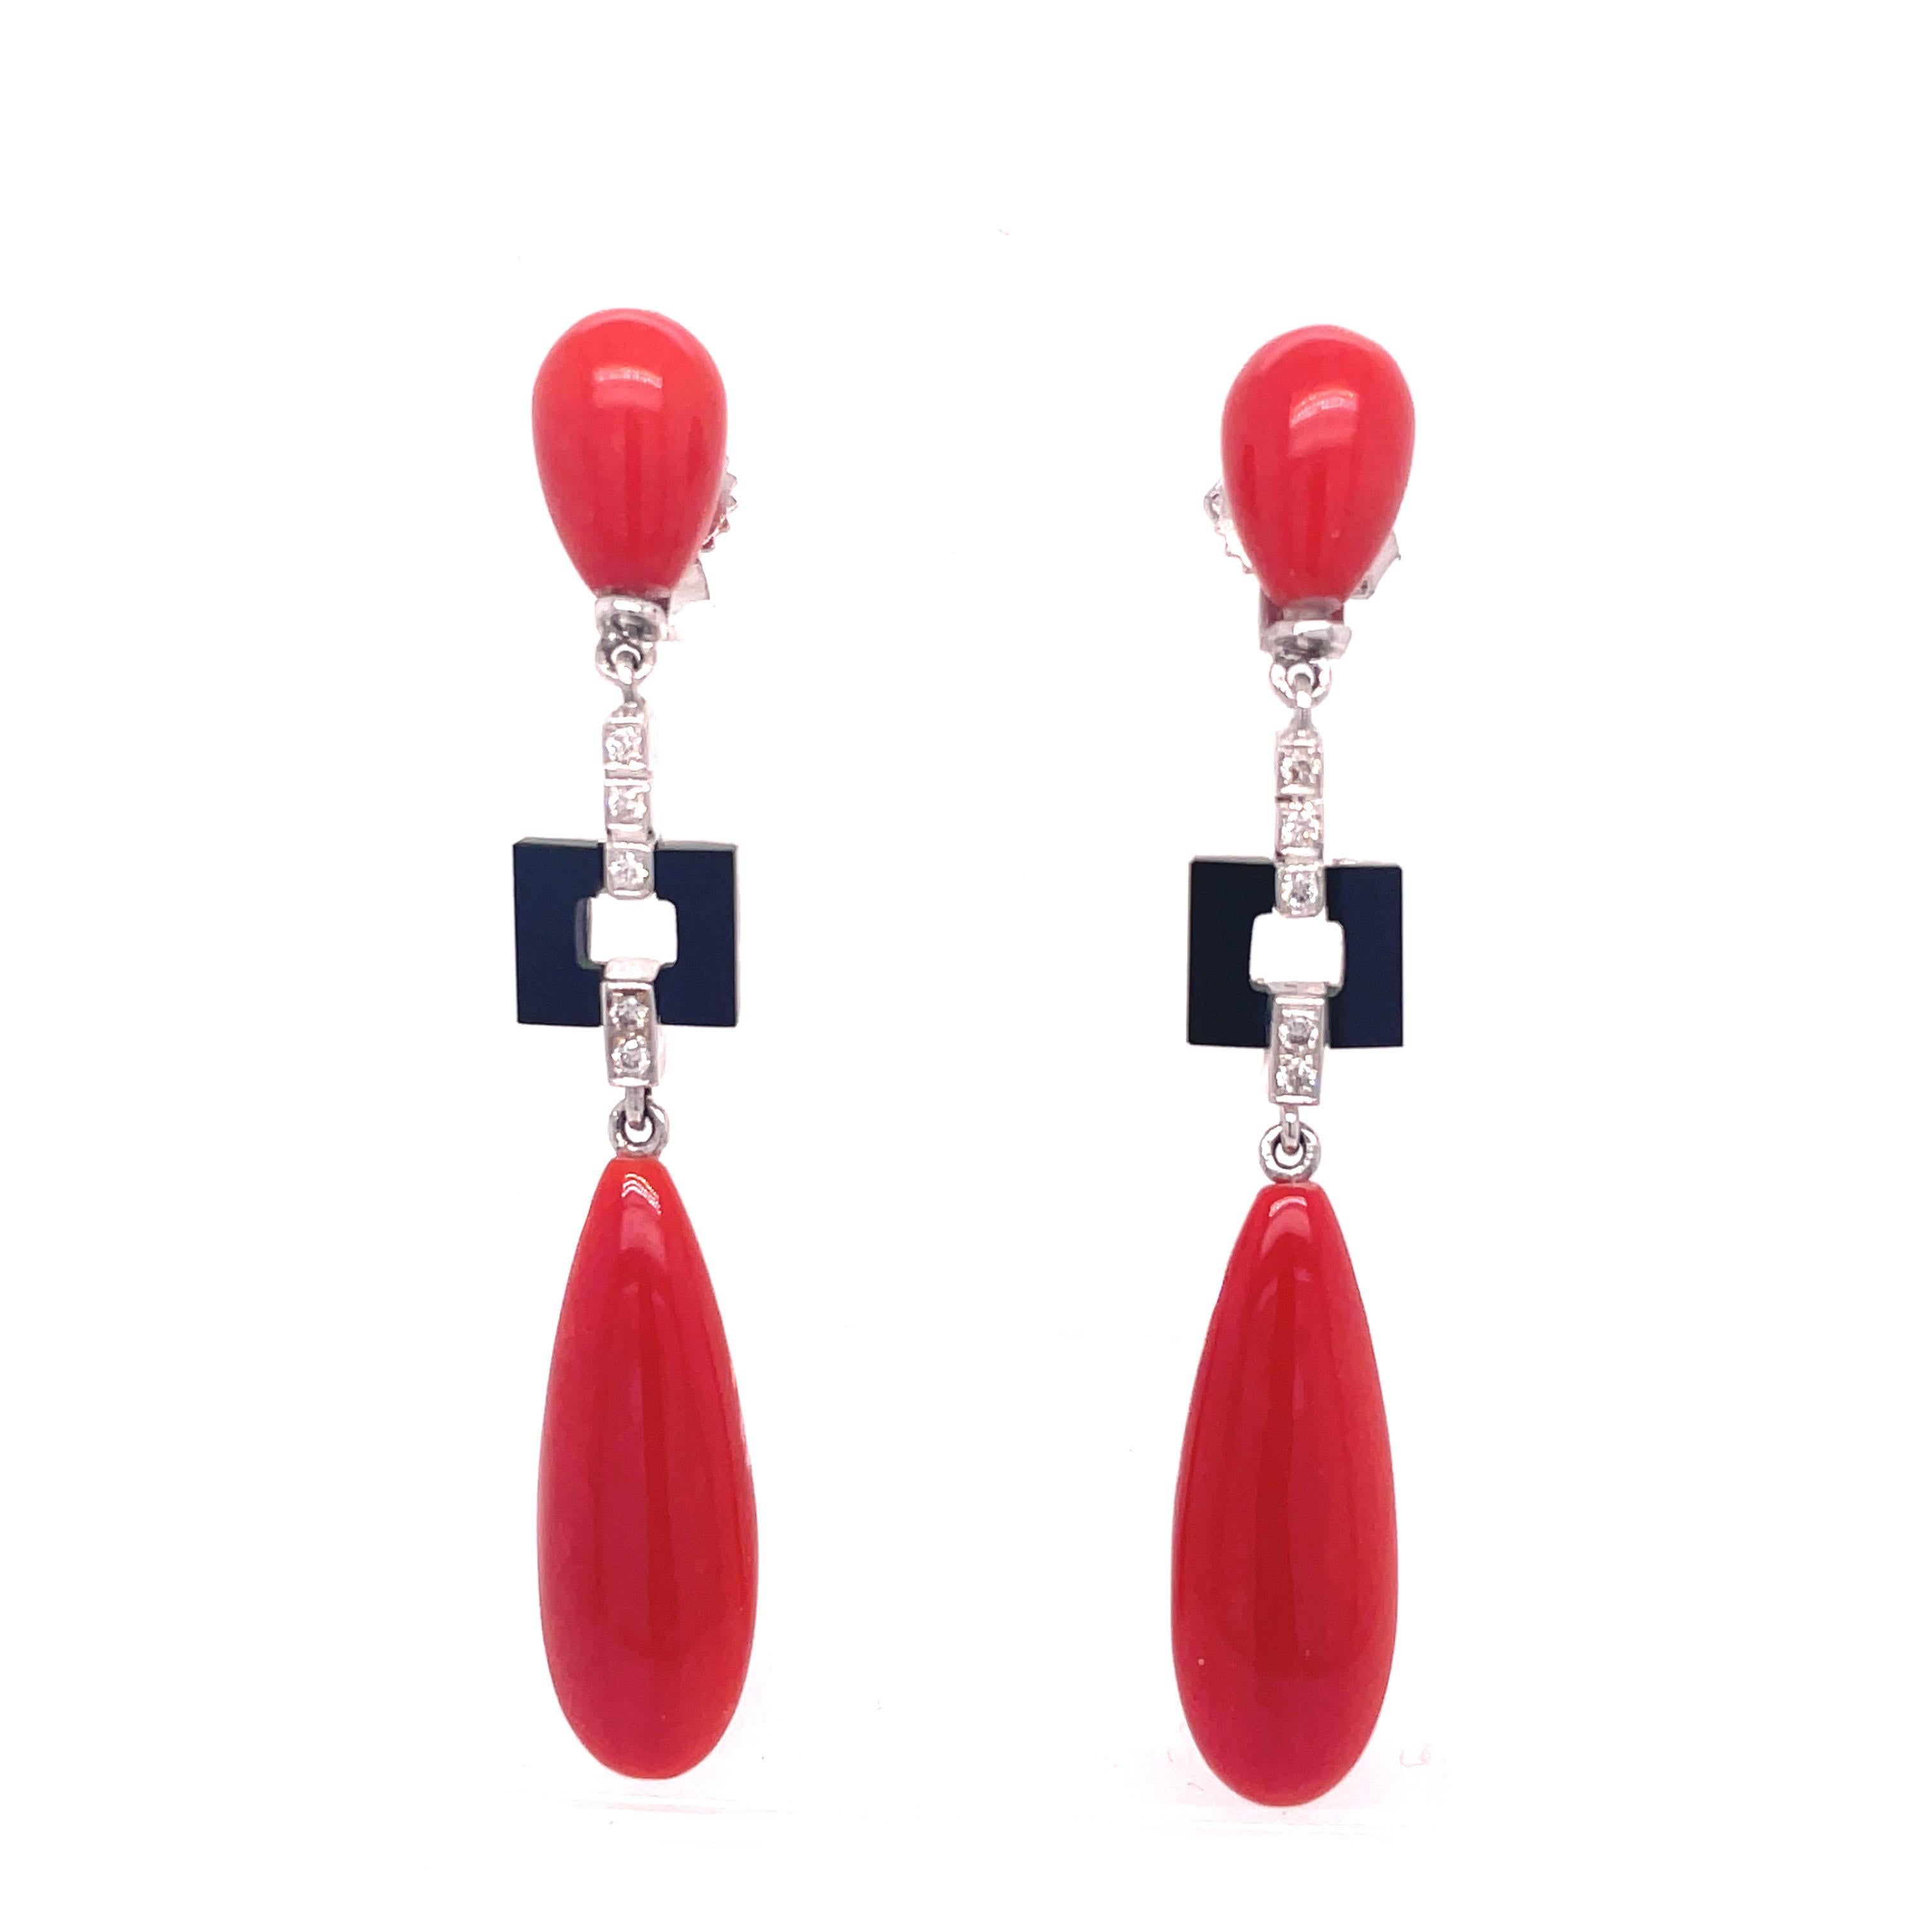 This is an exceptional pair of 1960s earrings, set in 18K White gold, that features bright red coral, bold geometric onyx, and bright white diamonds. This beautiful pair of earrings is fully articulated, so with every movement you make, the earrings